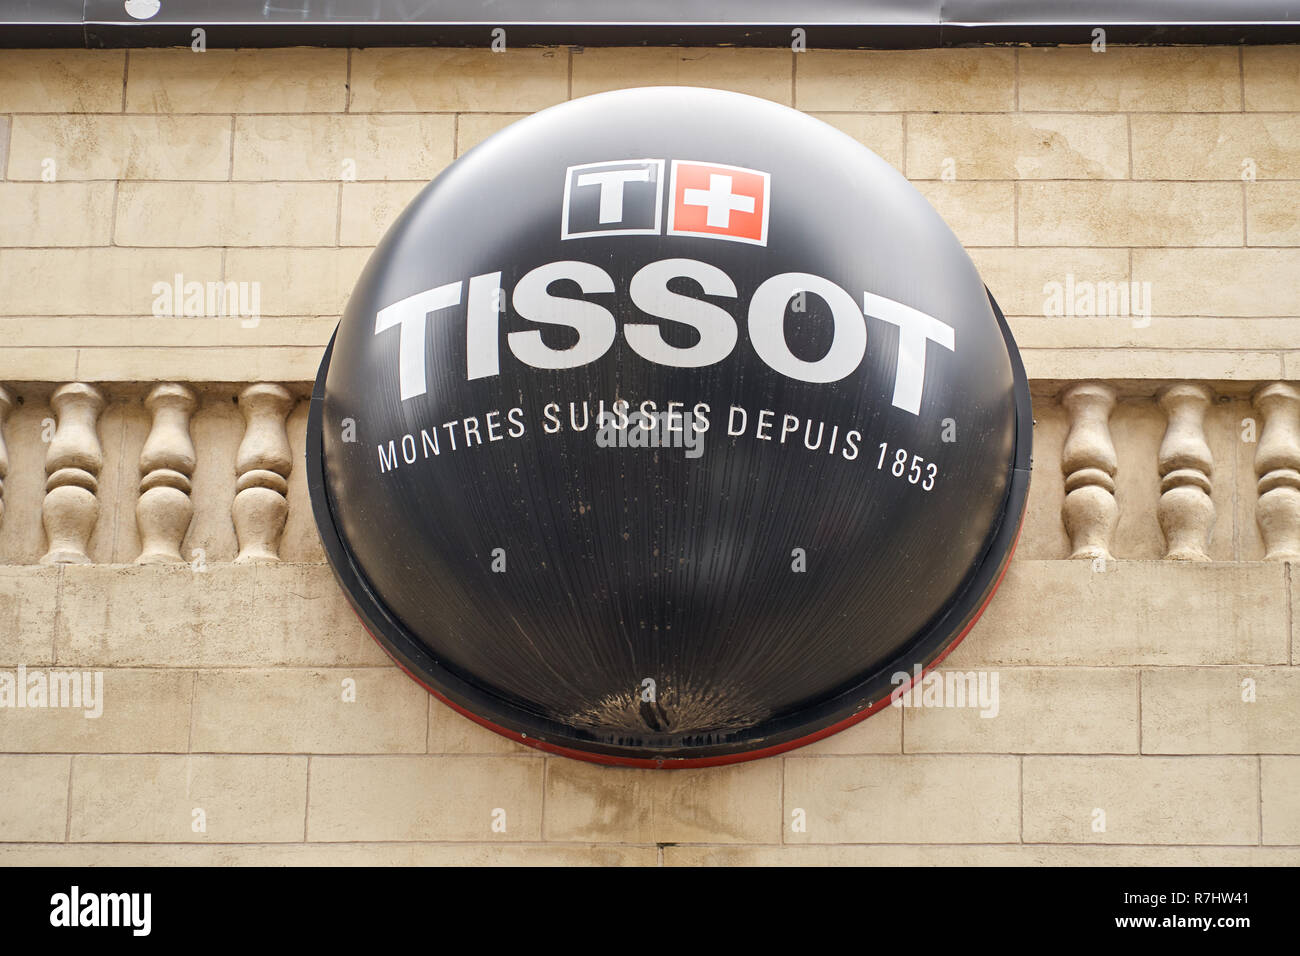 MONTREAL, CANADA - OCTOBER 4, 2018: Tissot logo and sign on a building. Tissot is a popular and famous Swiss luxury watchmaker. Stock Photo